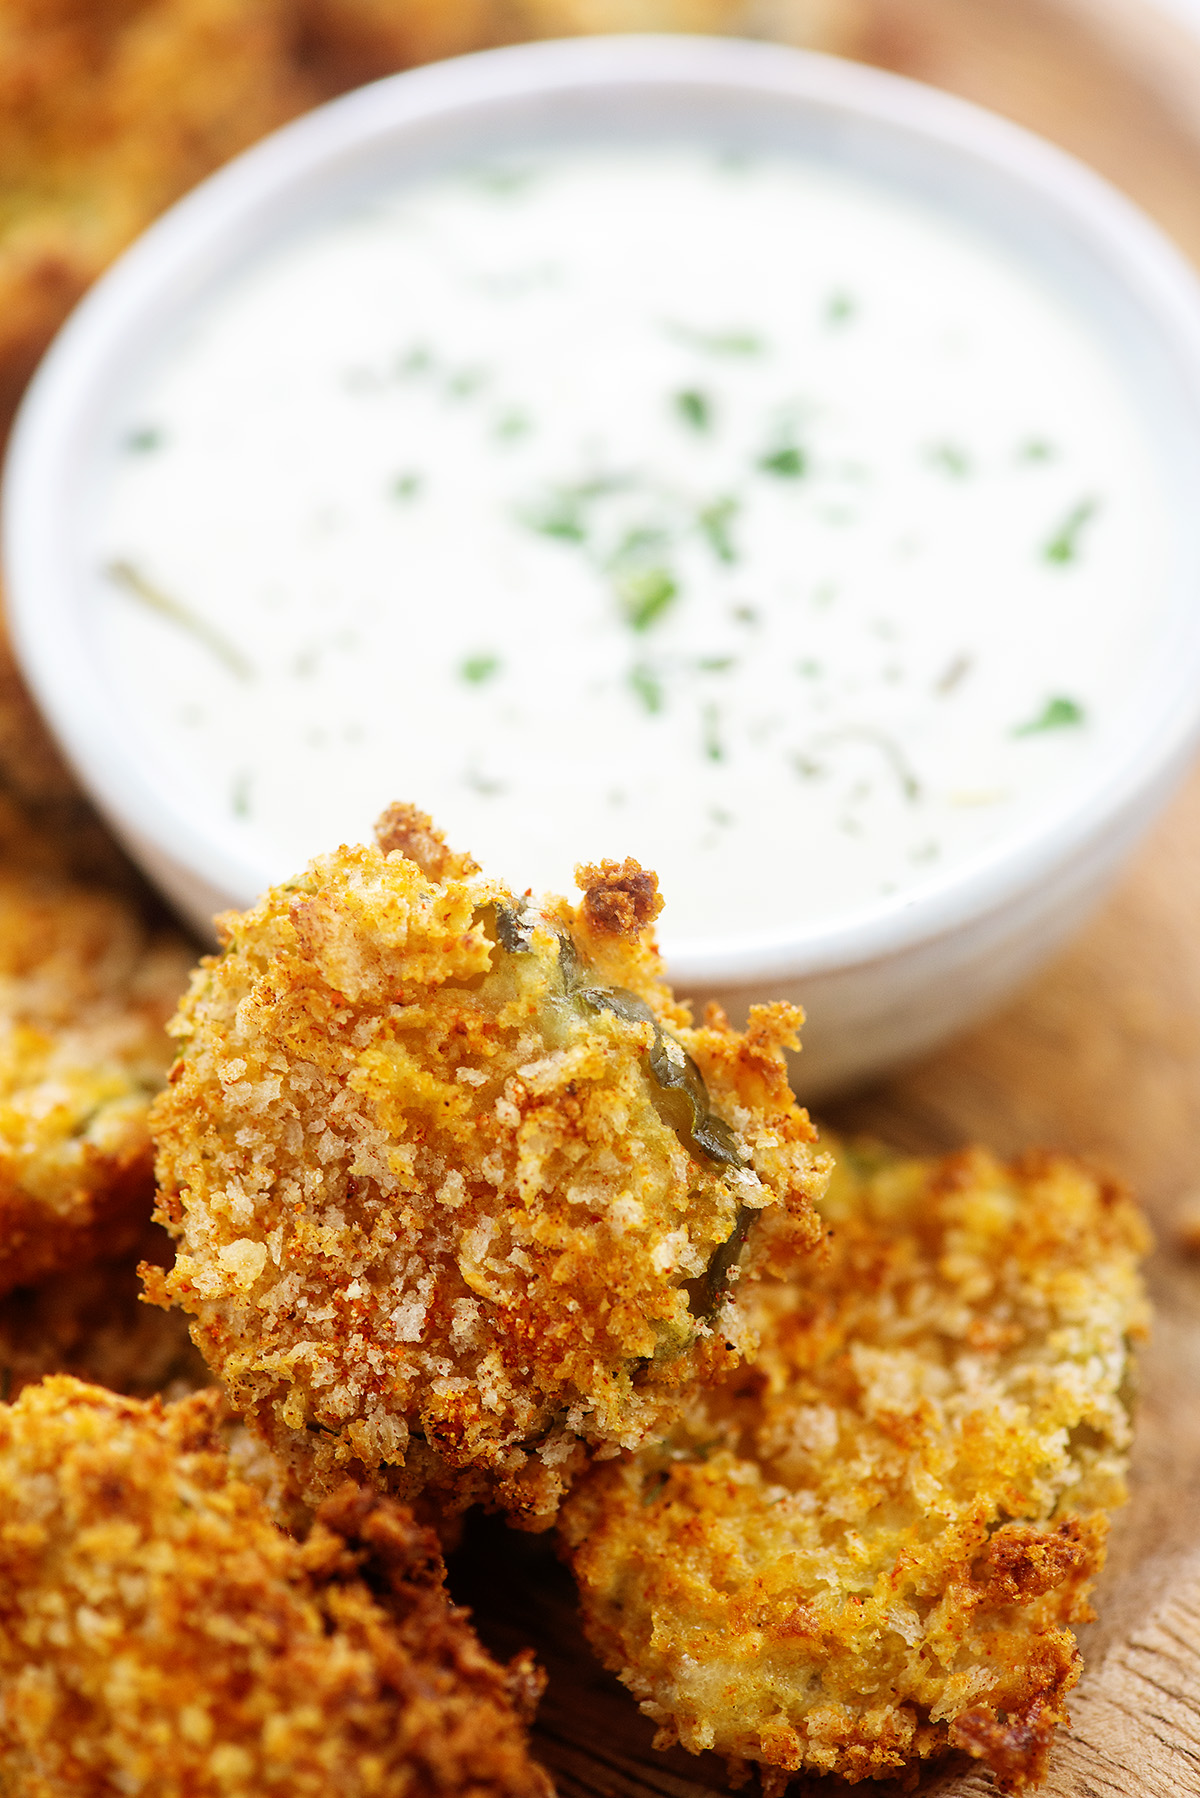 crispy fried pickles next to ranch dip.